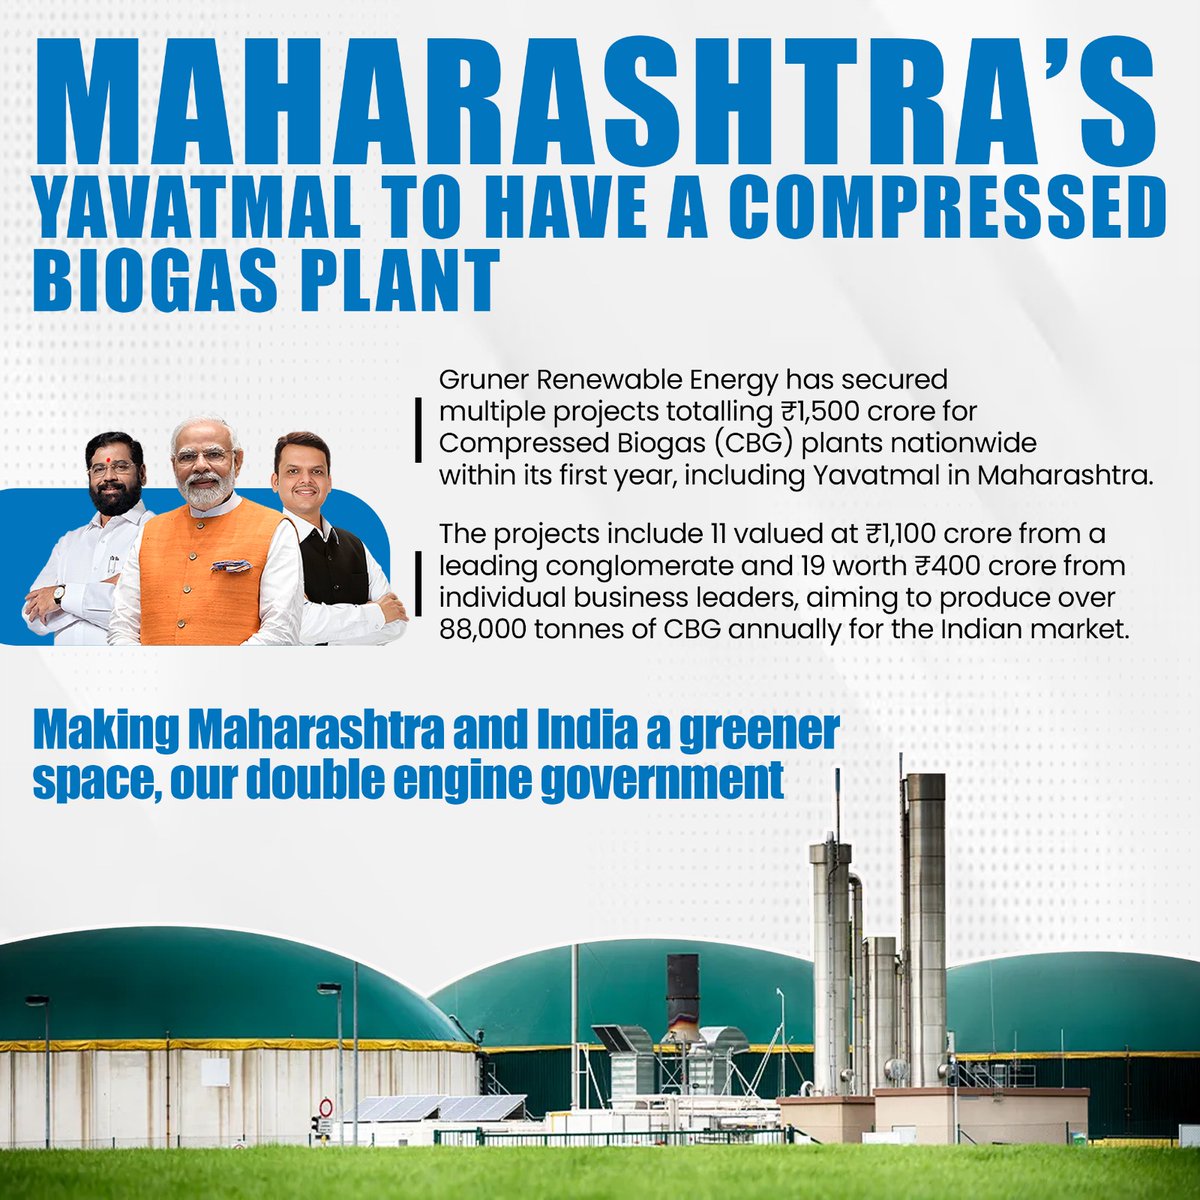 Exciting news for sustainable energy in Maharashtra! With the establishment of a compressed biogas plant in Yavatmal, we're taking a big step towards a greener future. Kudos to CM Eknath Shinde and his government for prioritizing renewable energy initiatives.